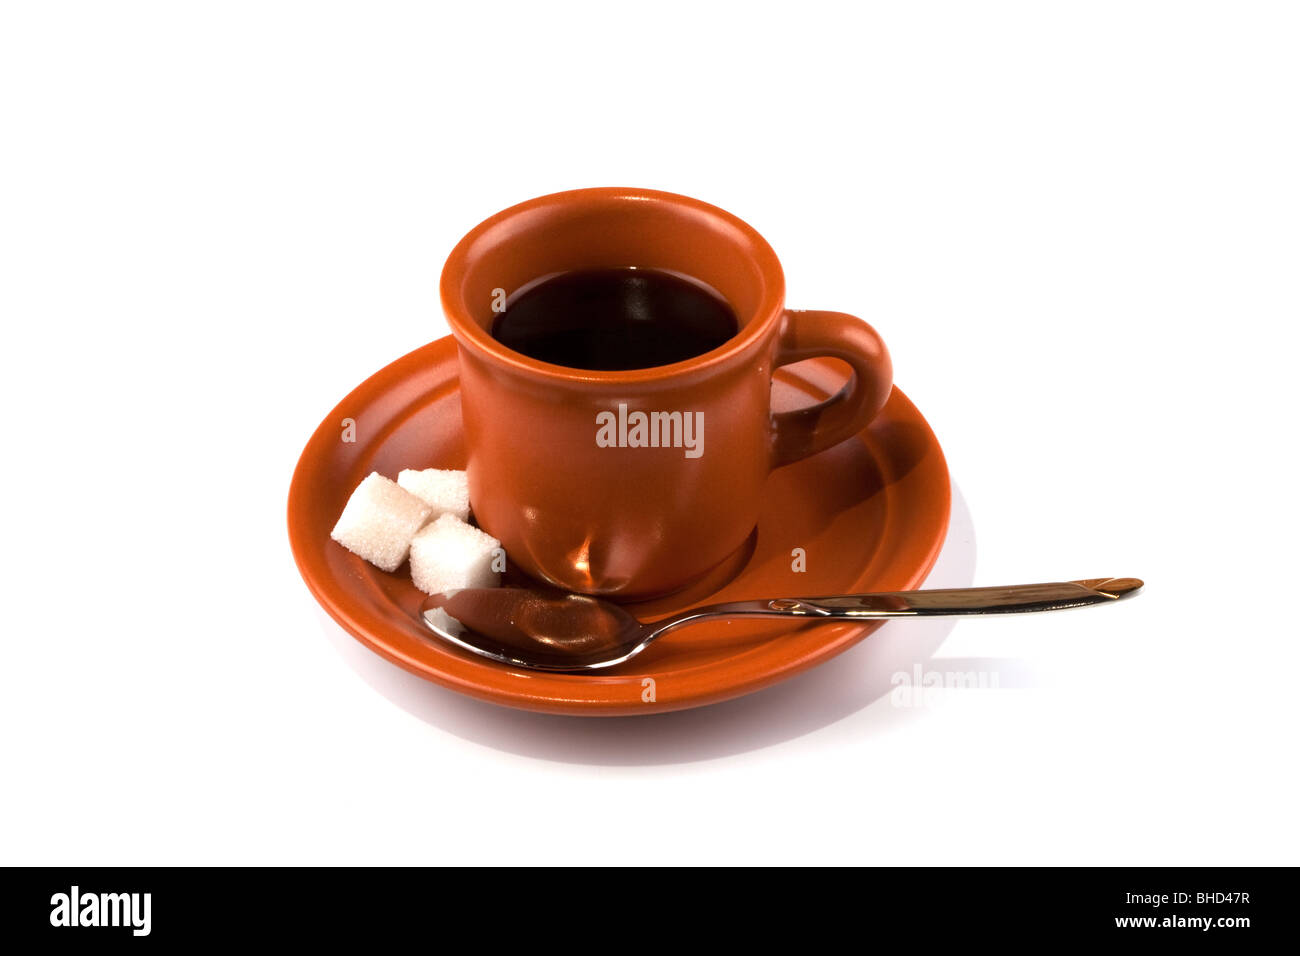 Ceramic cup from coffee, a saucer, a teaspoon, sugar on a white background Stock Photo